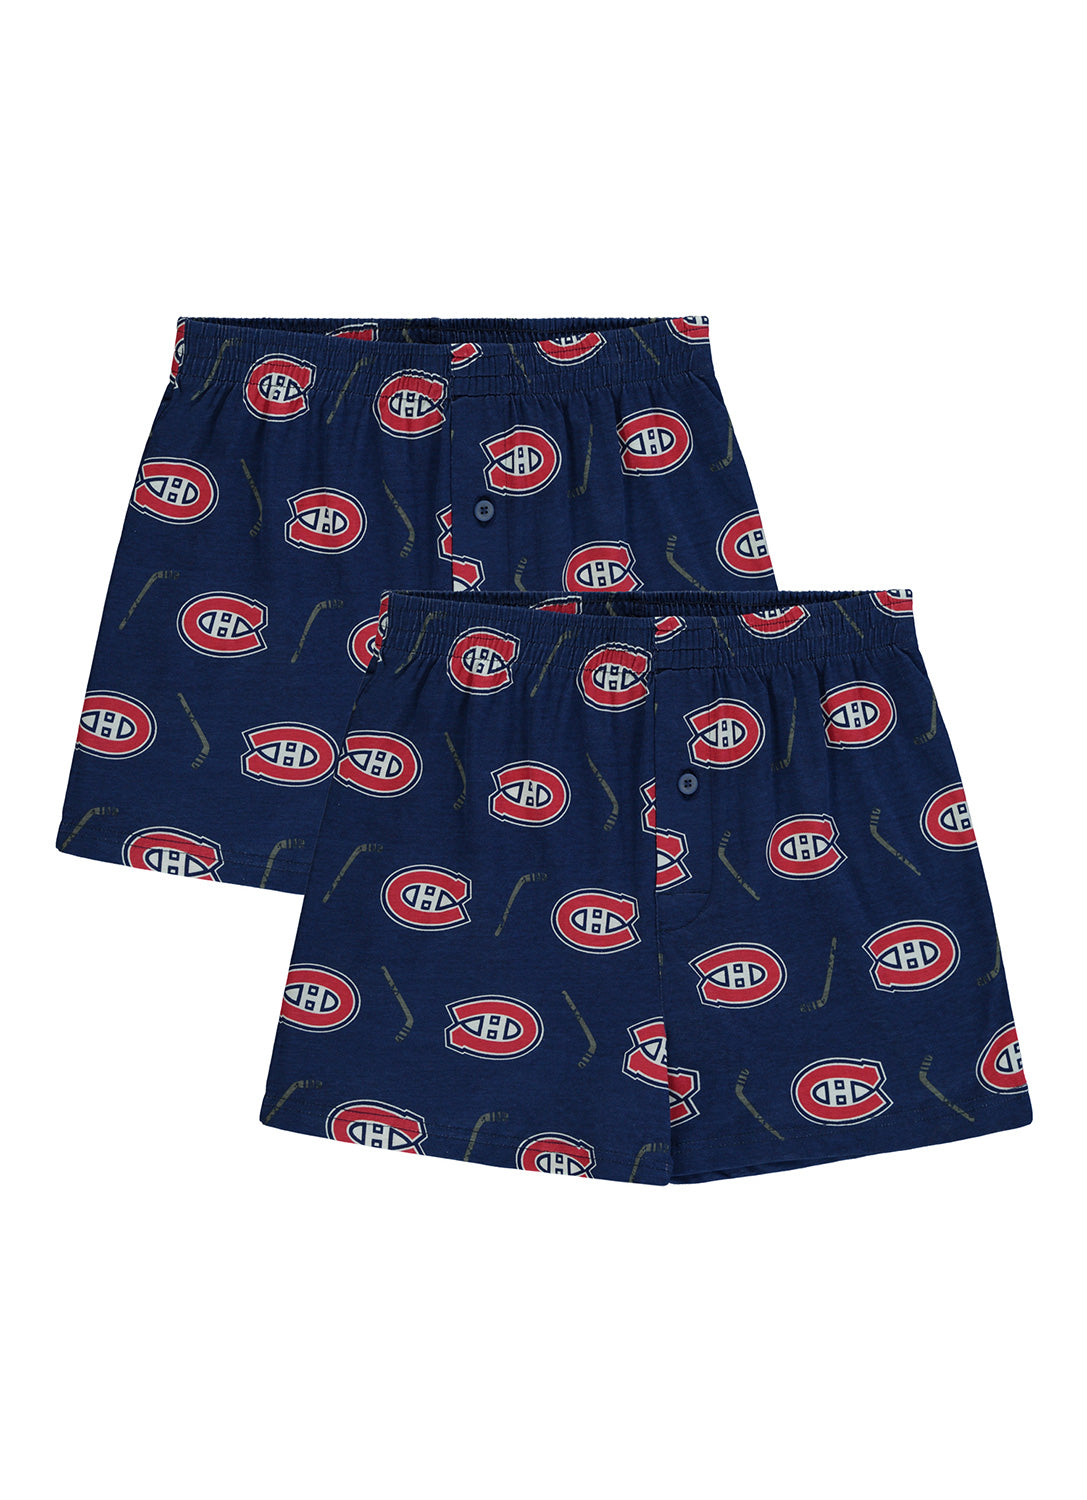 Pair of mens boxers with Montreal Canadiens print (navy)